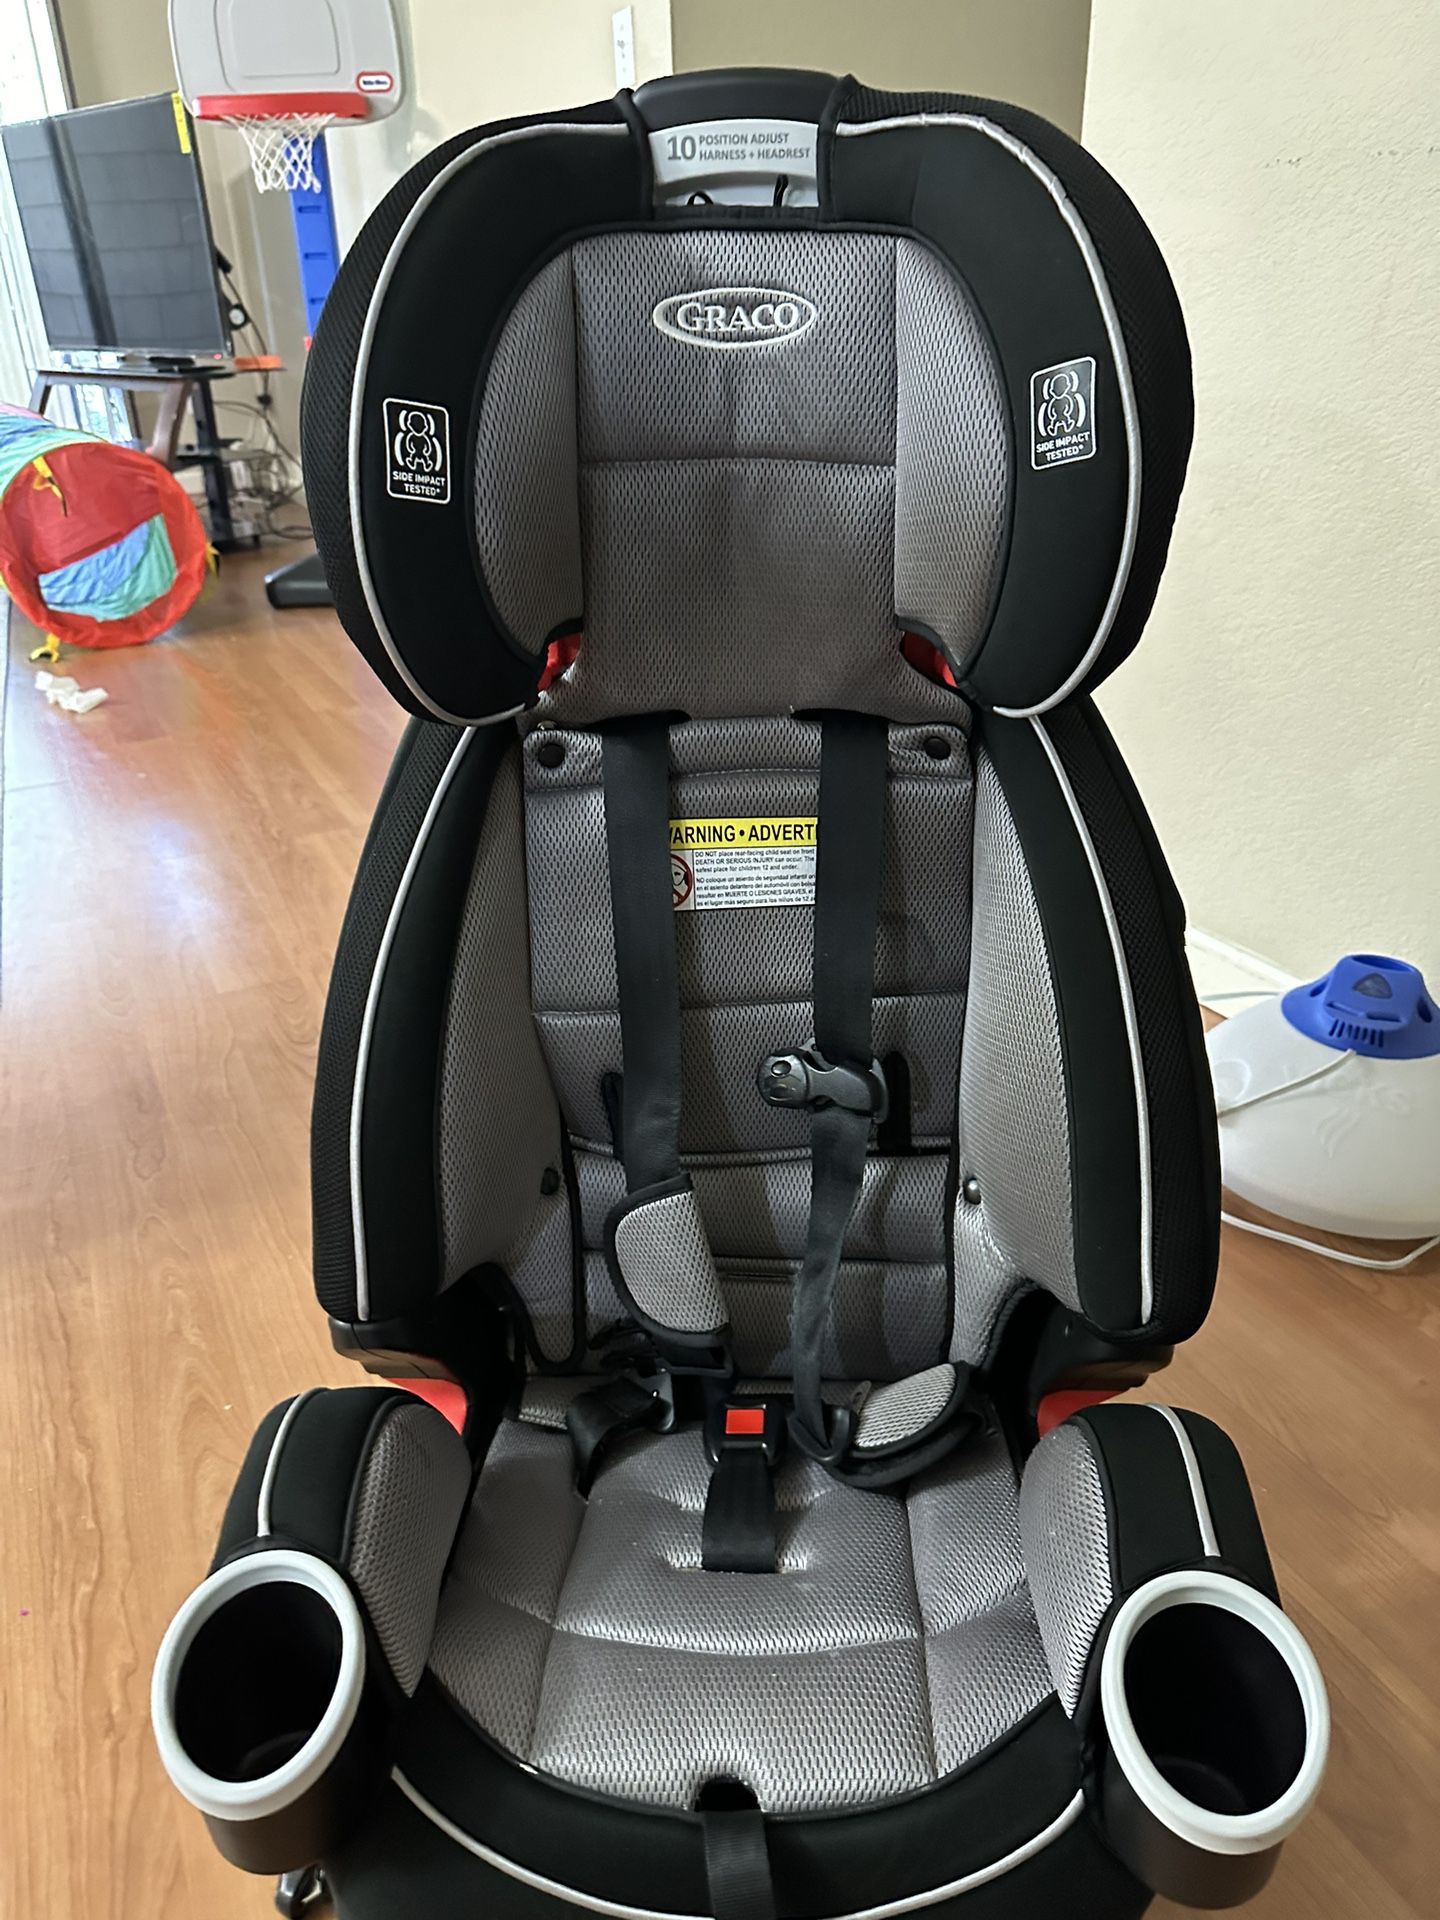 Graco Car Seat ( 3 In 1) 10 Position Adjust Harness + Headrest